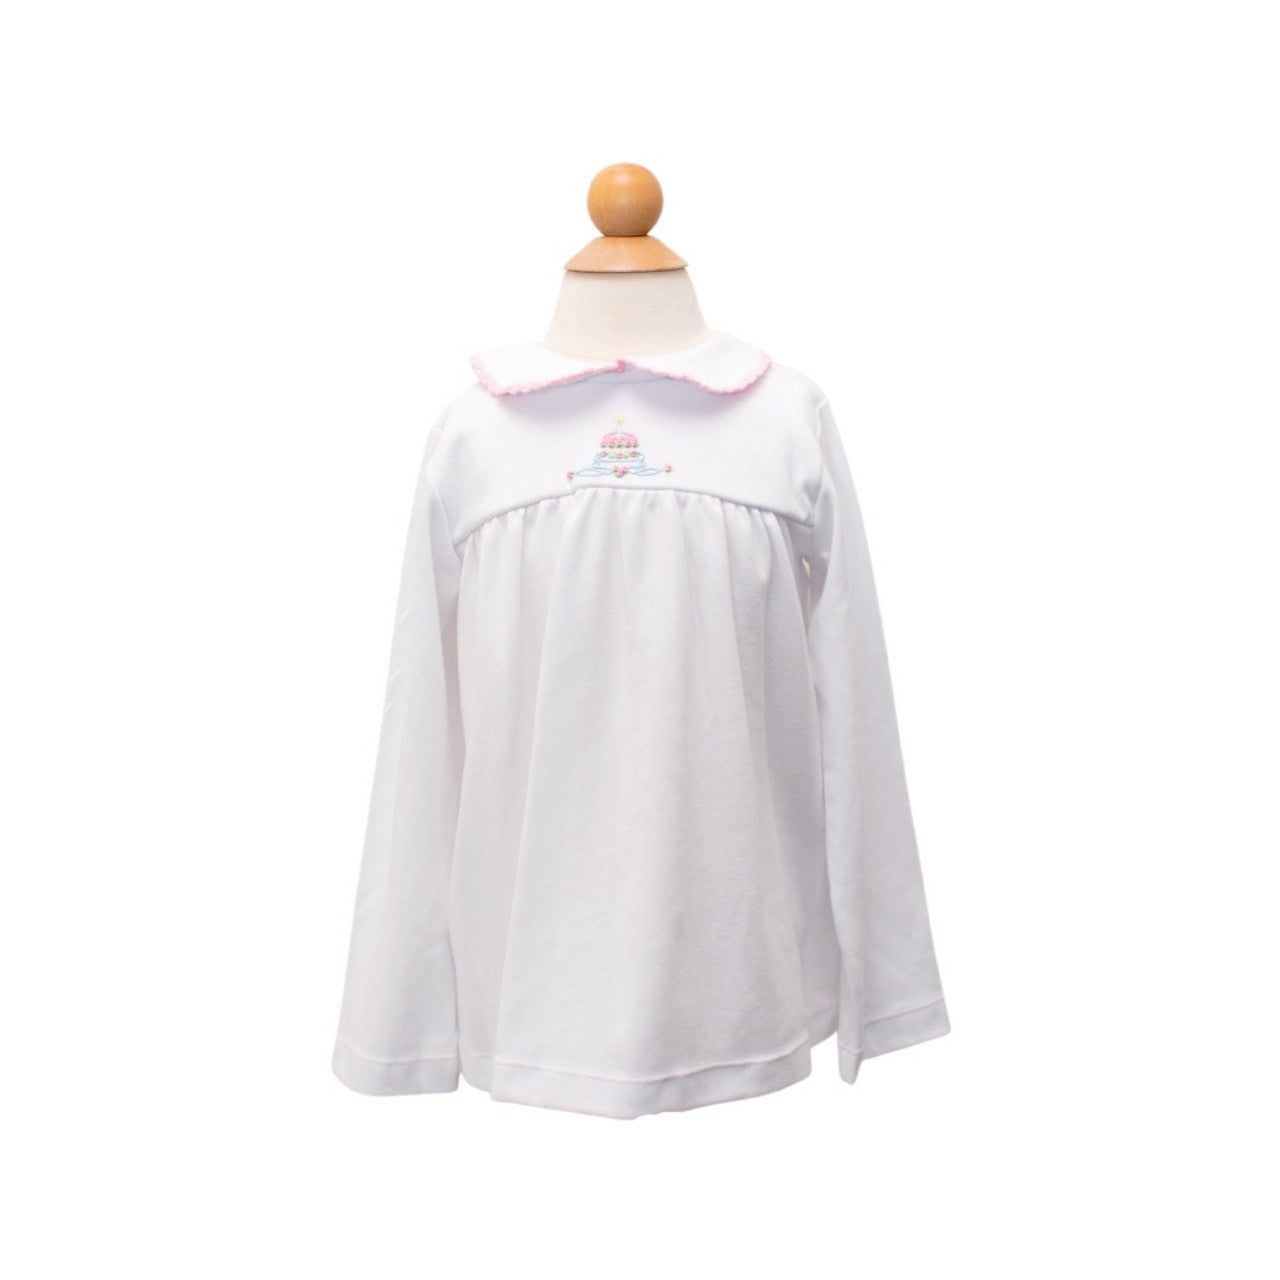 Molly Top L/S - Birthday Cake Embroidery